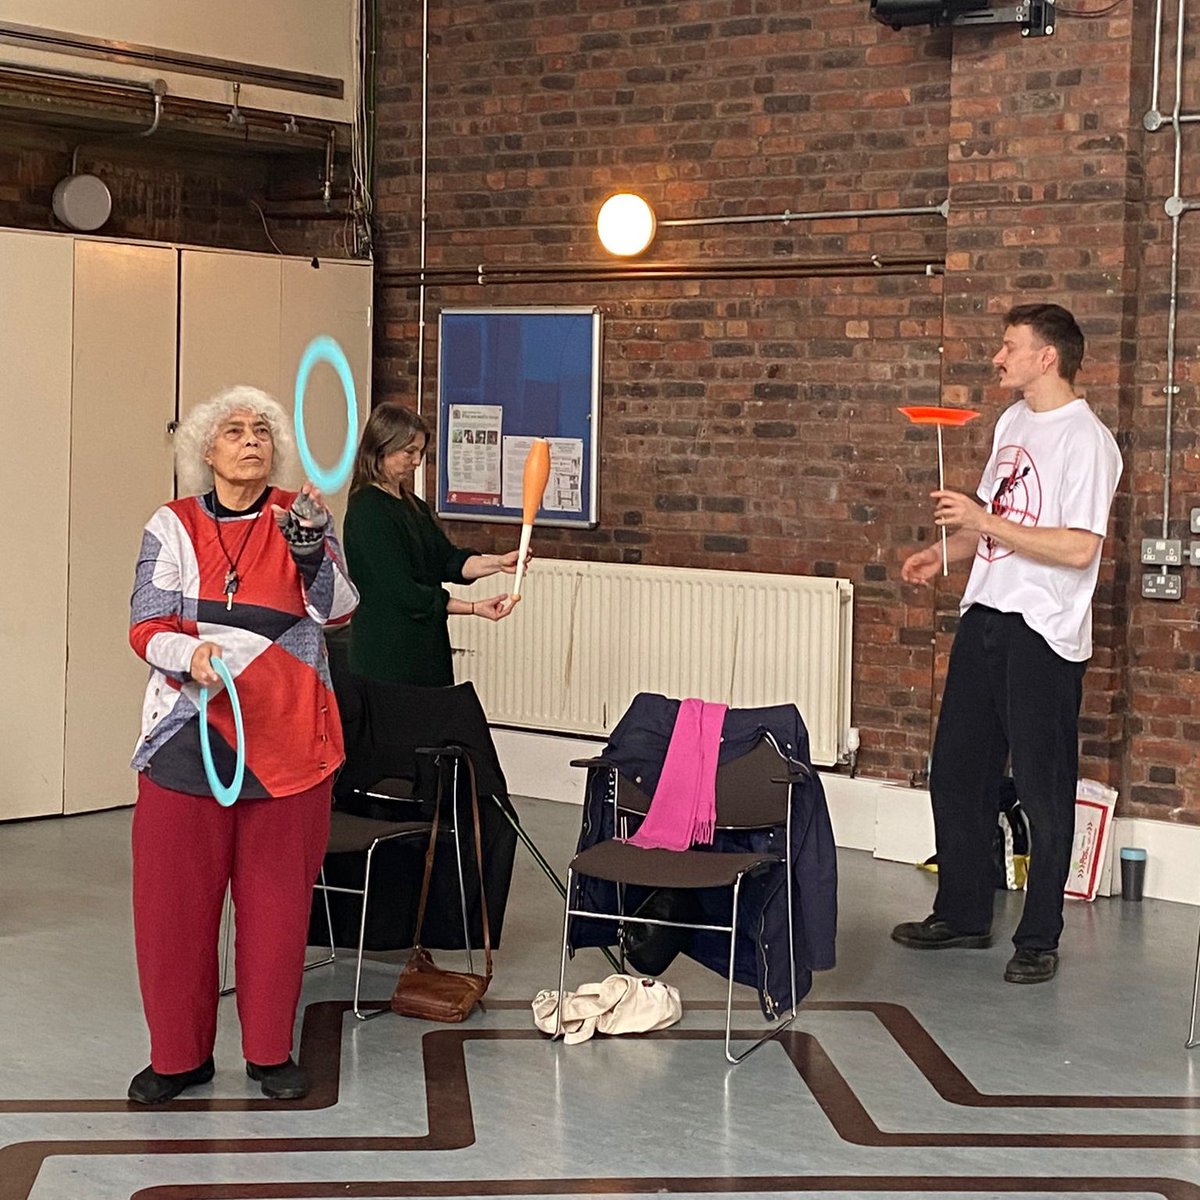 Our circus skills group are learning more and getting better all the time. Its FREE to join, just come along on a Monday, 11.30-1pm, Island House, Roserton Street, E14 3PG. #Community #Friendship #Fun